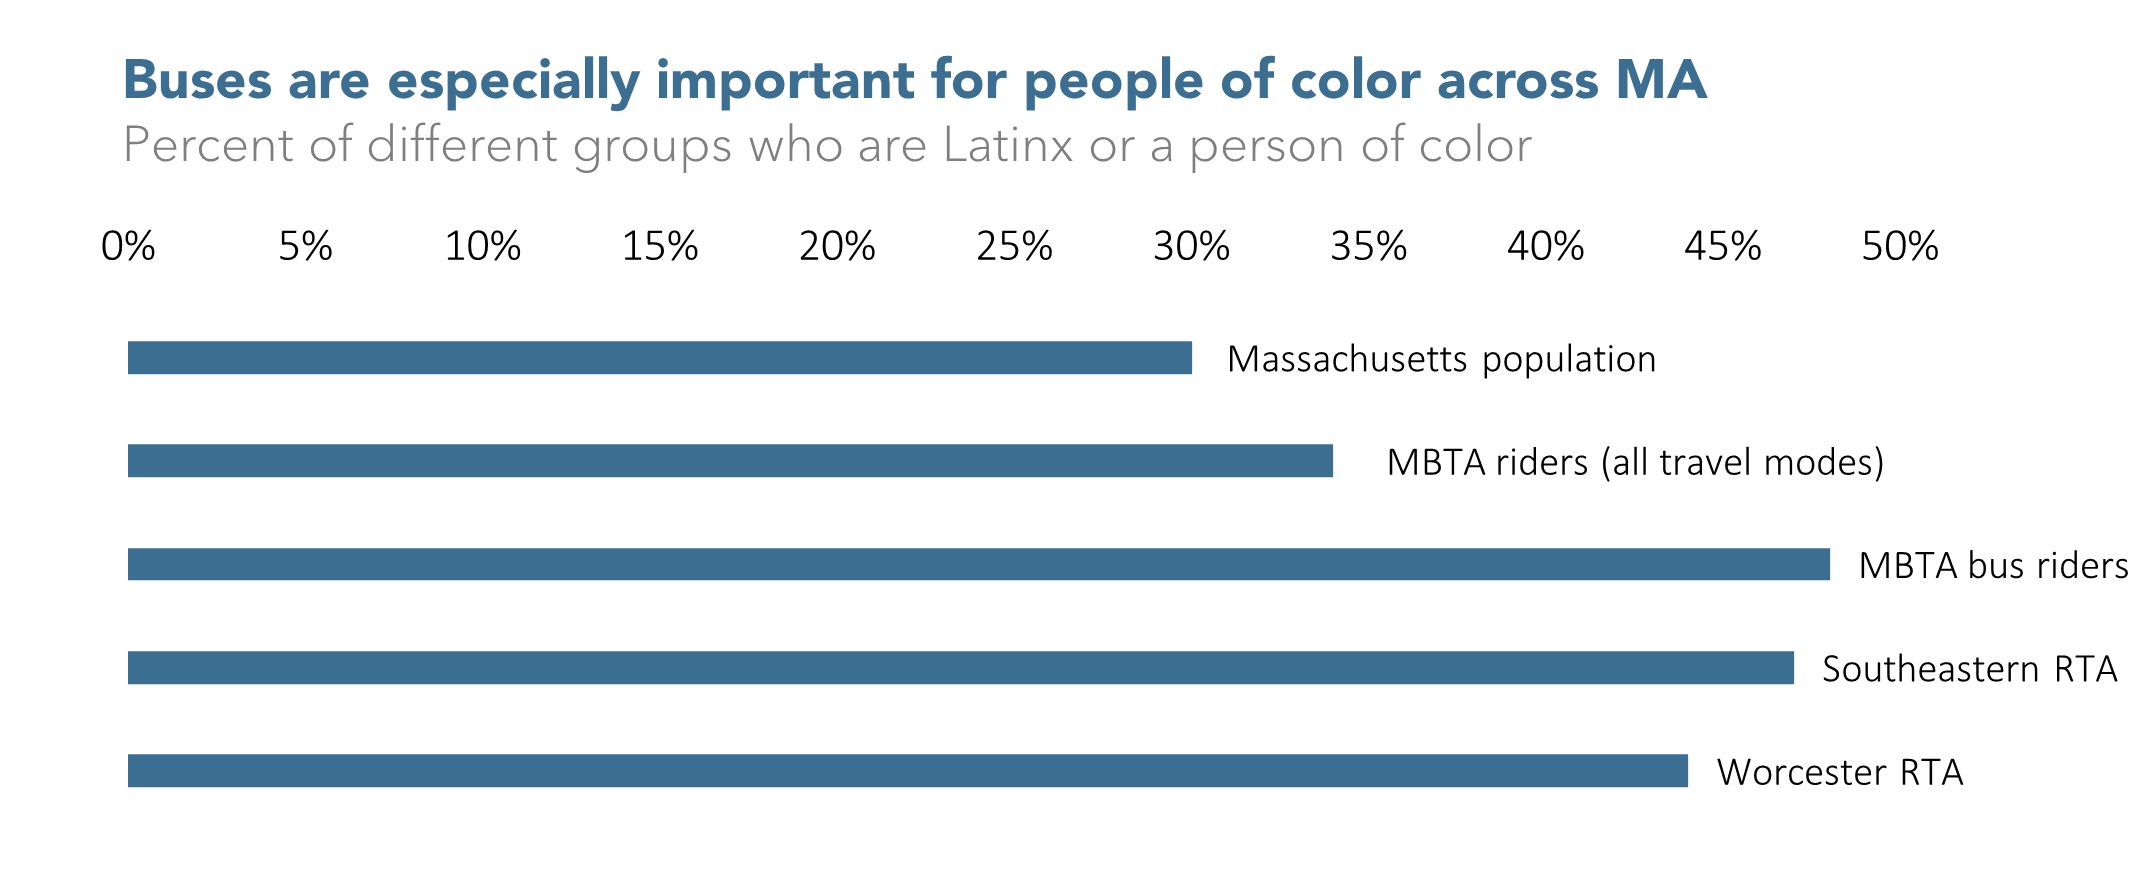 Buses are especially important for people of color across MA